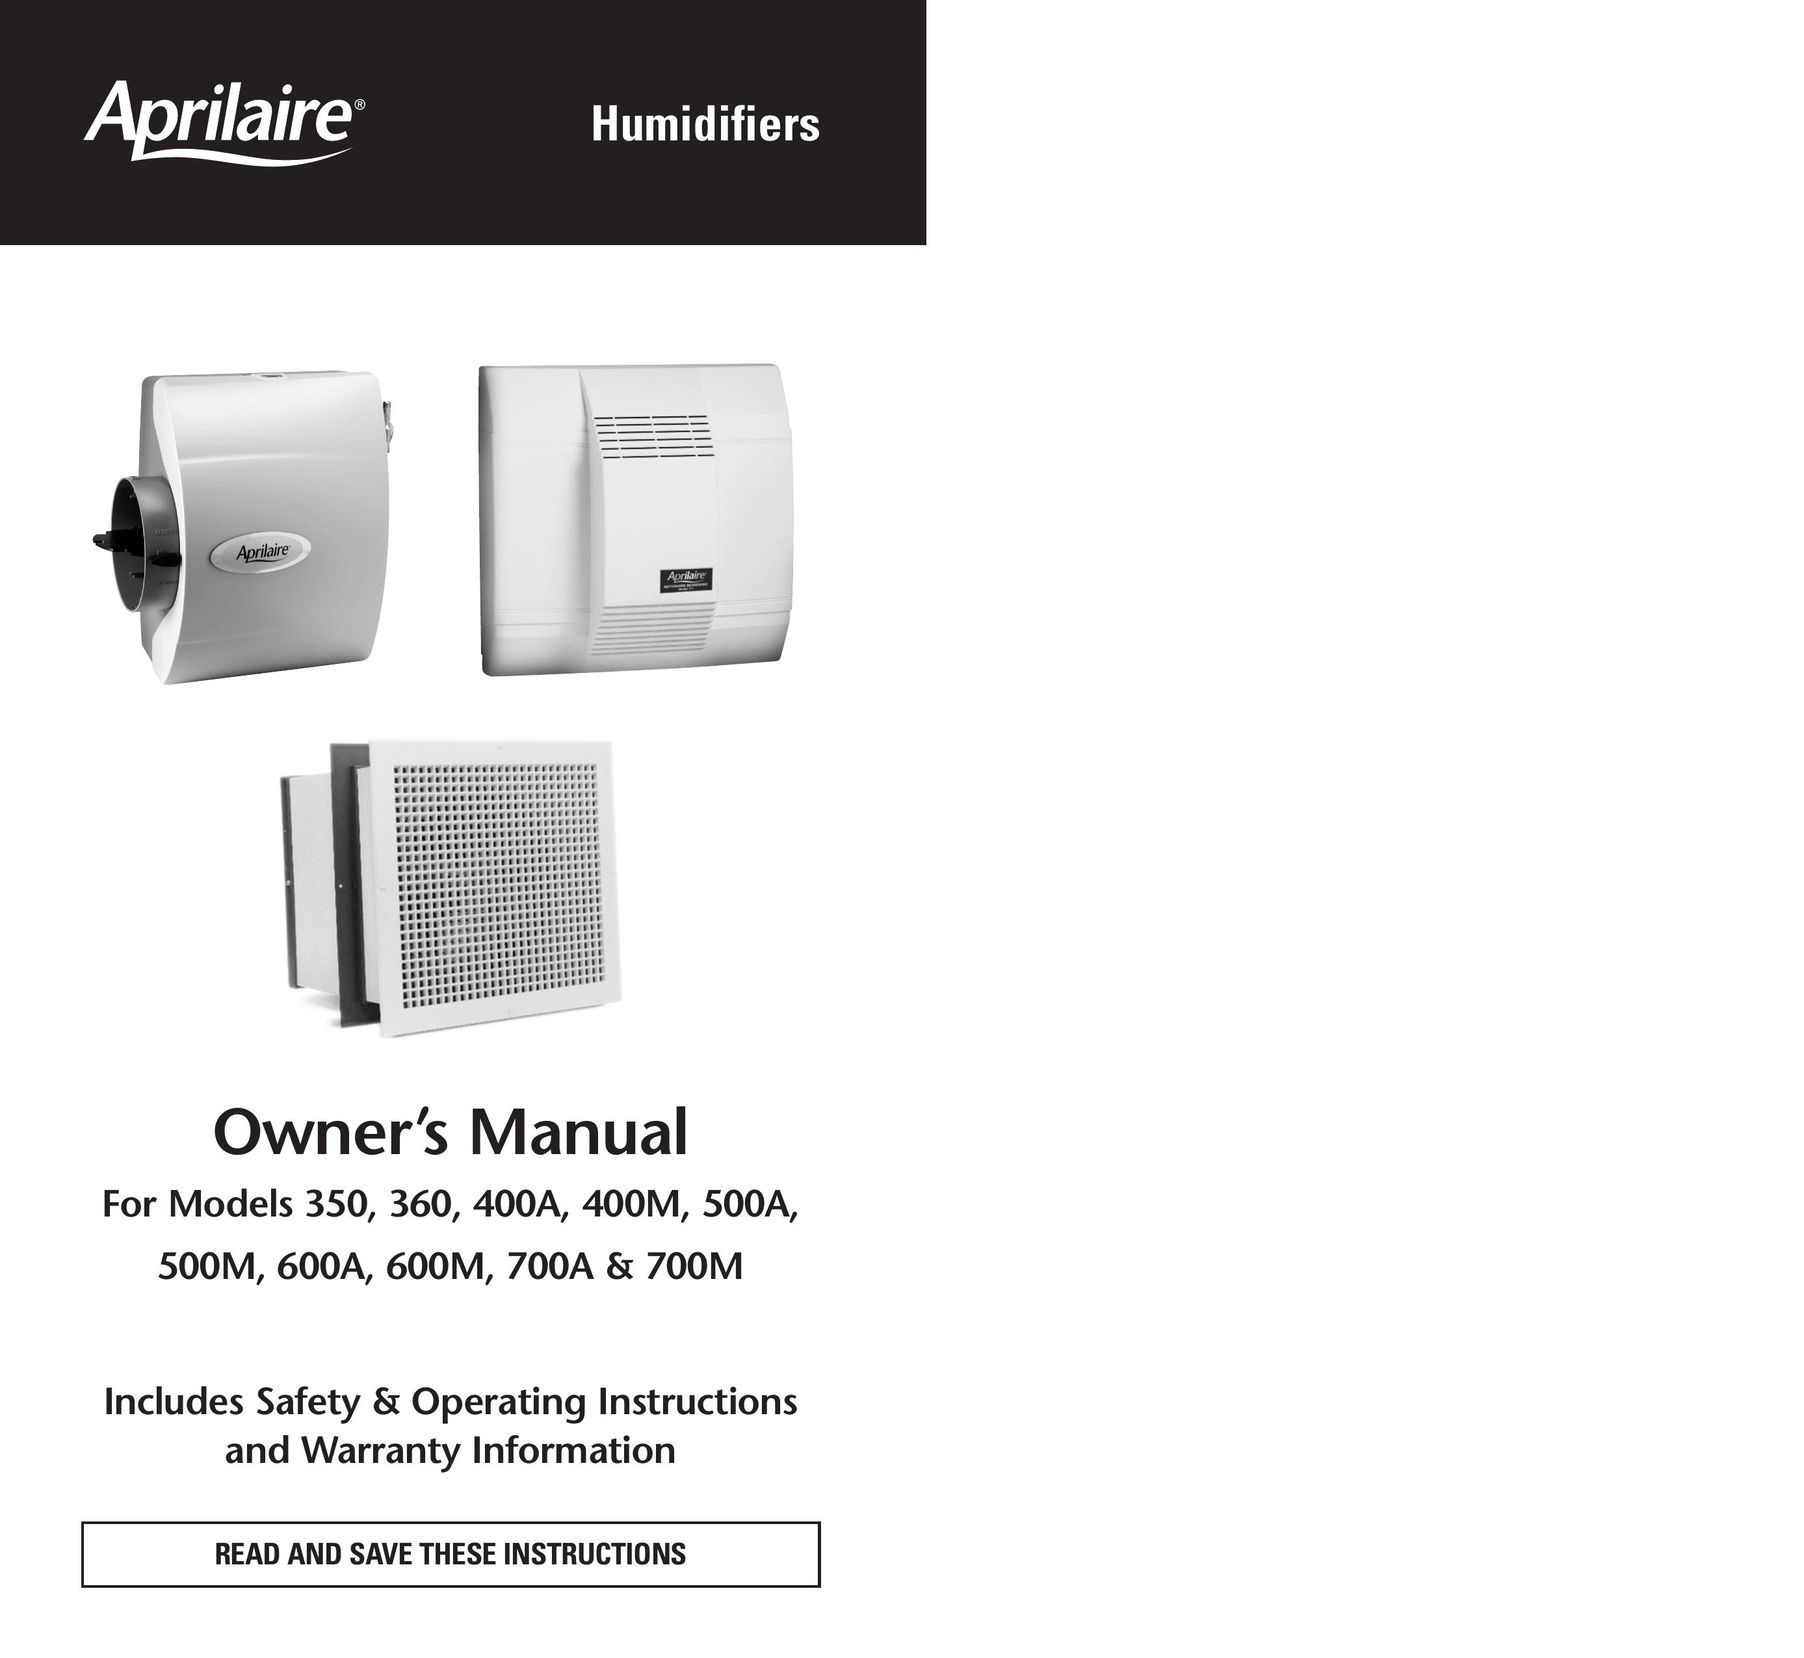 Aprilaire 400A Humidifier User Manual